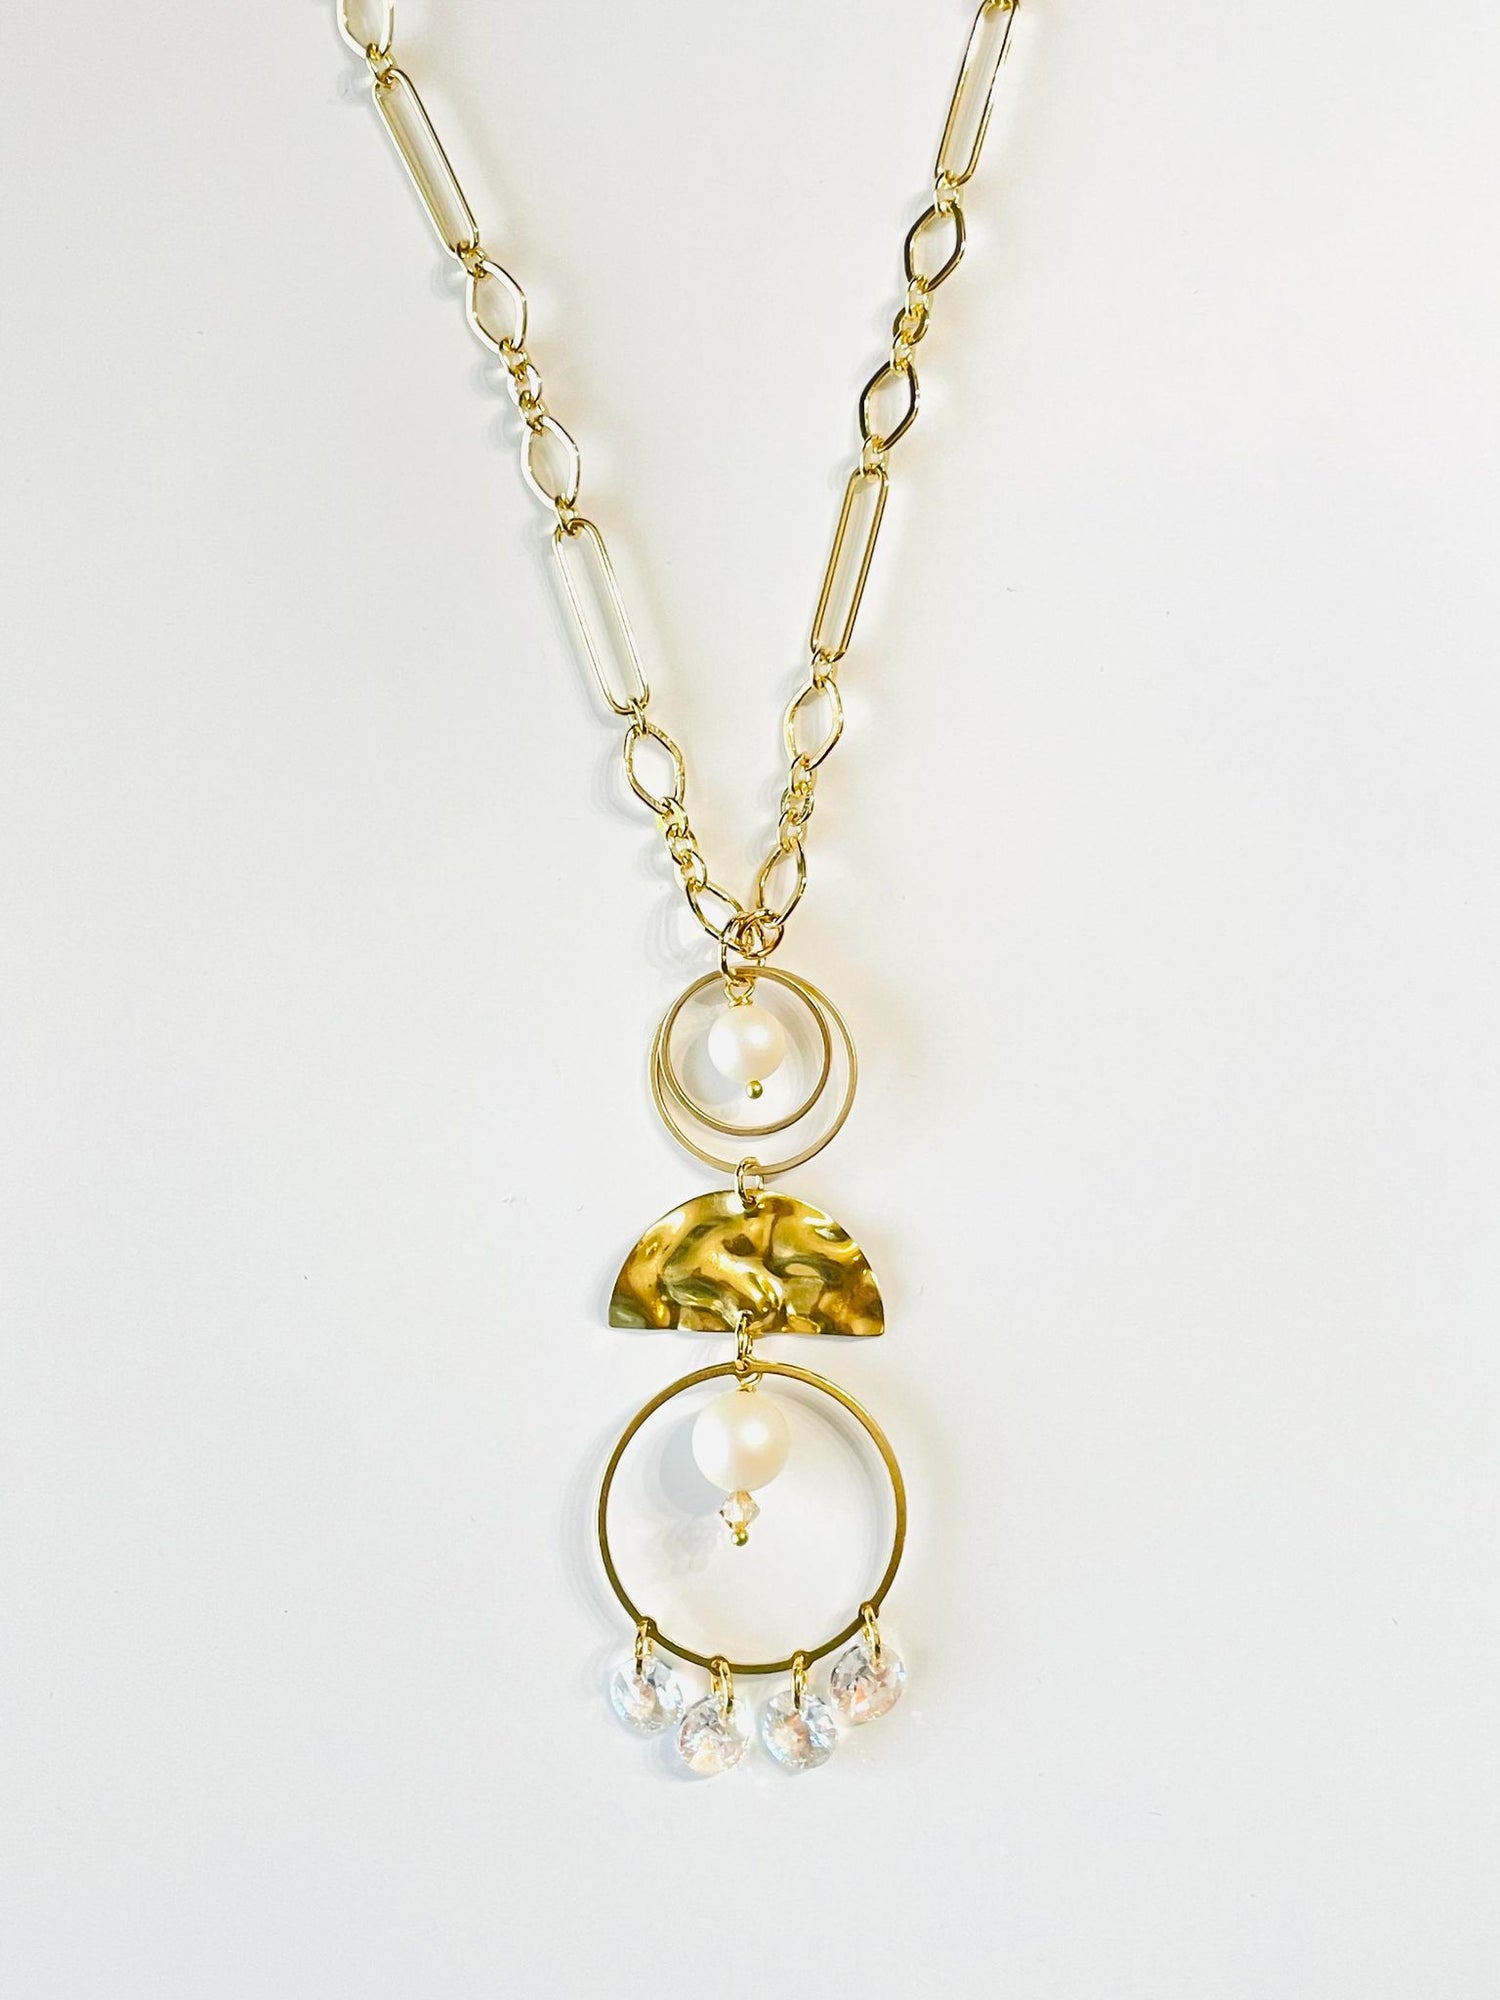 Shimmery Gold Necklace